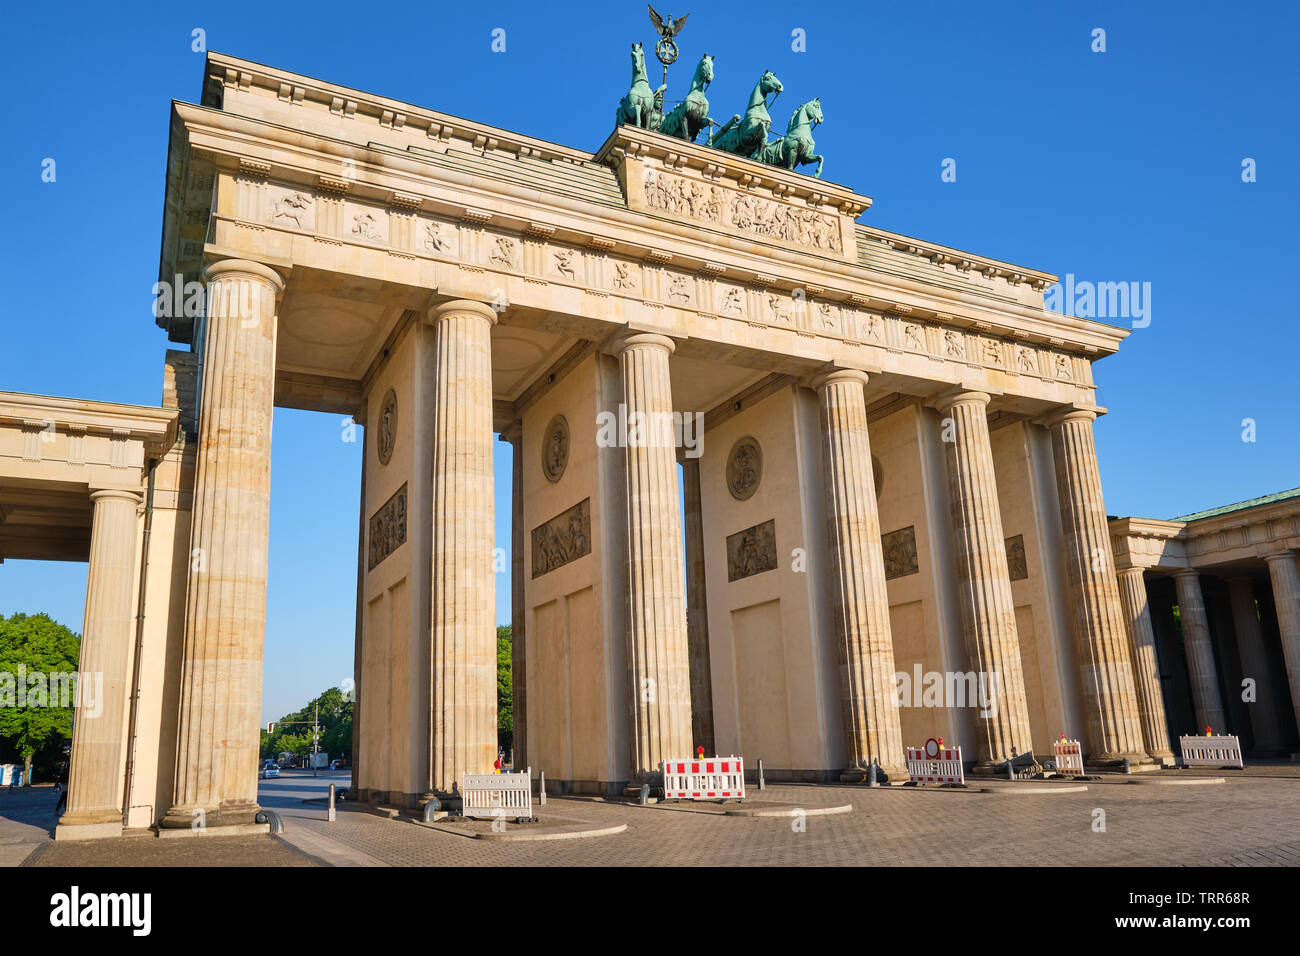 The Brandenburg Gate, Berlins most famous landmark, on a sunny day Stock Photo